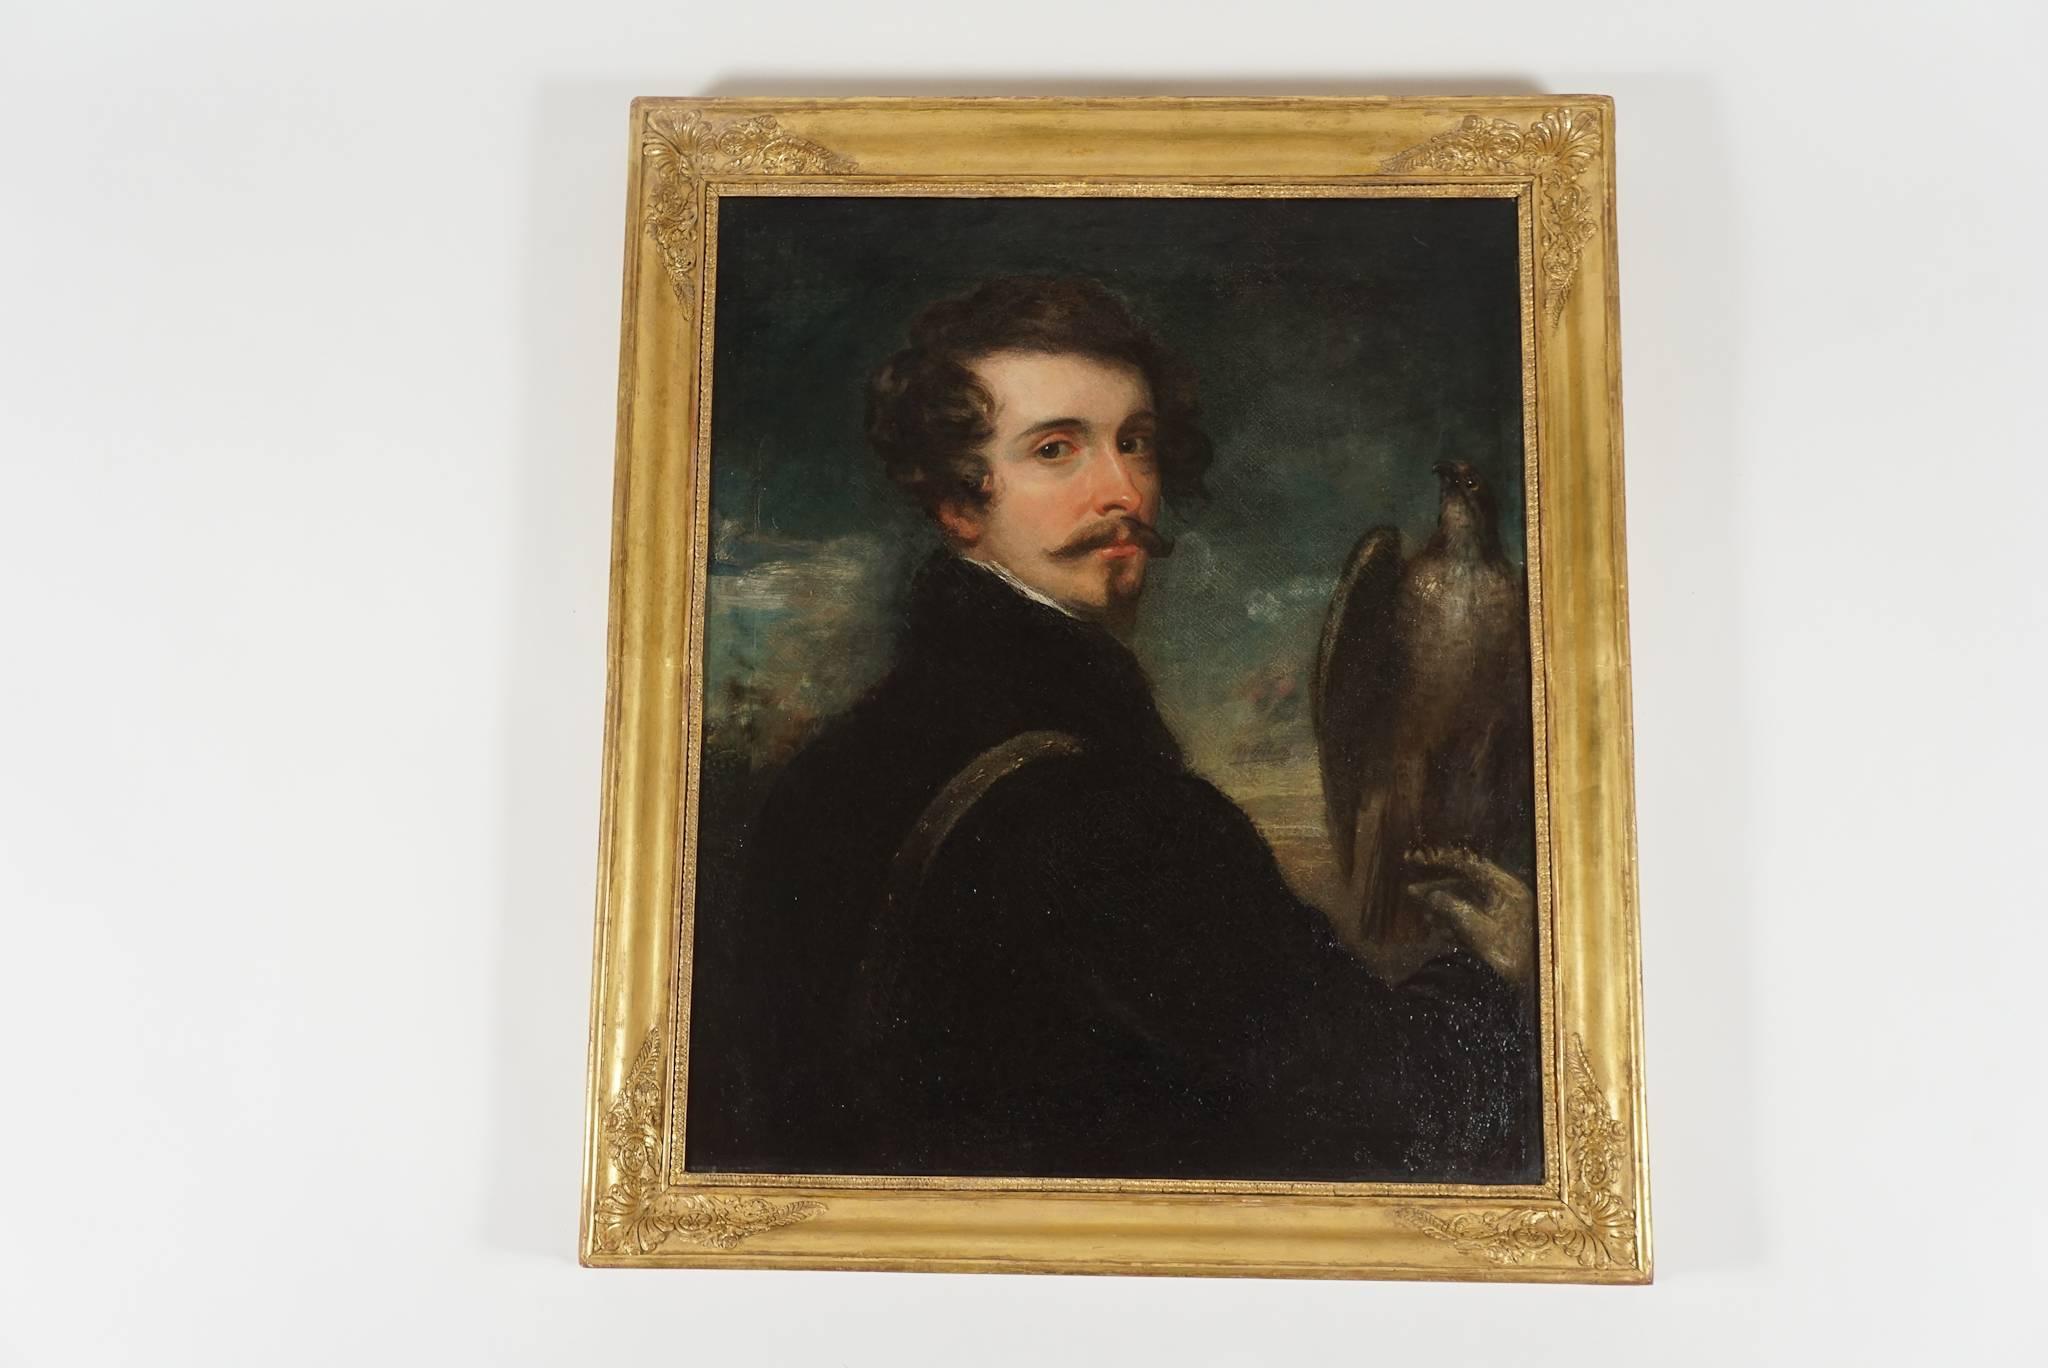 An elegant, circa 1830 German Romantic School oil on canvas portrait painting of a handsome gentleman with a falcon perched on right hand housed in original Empire giltwood frame.  Canvas measures 29.63